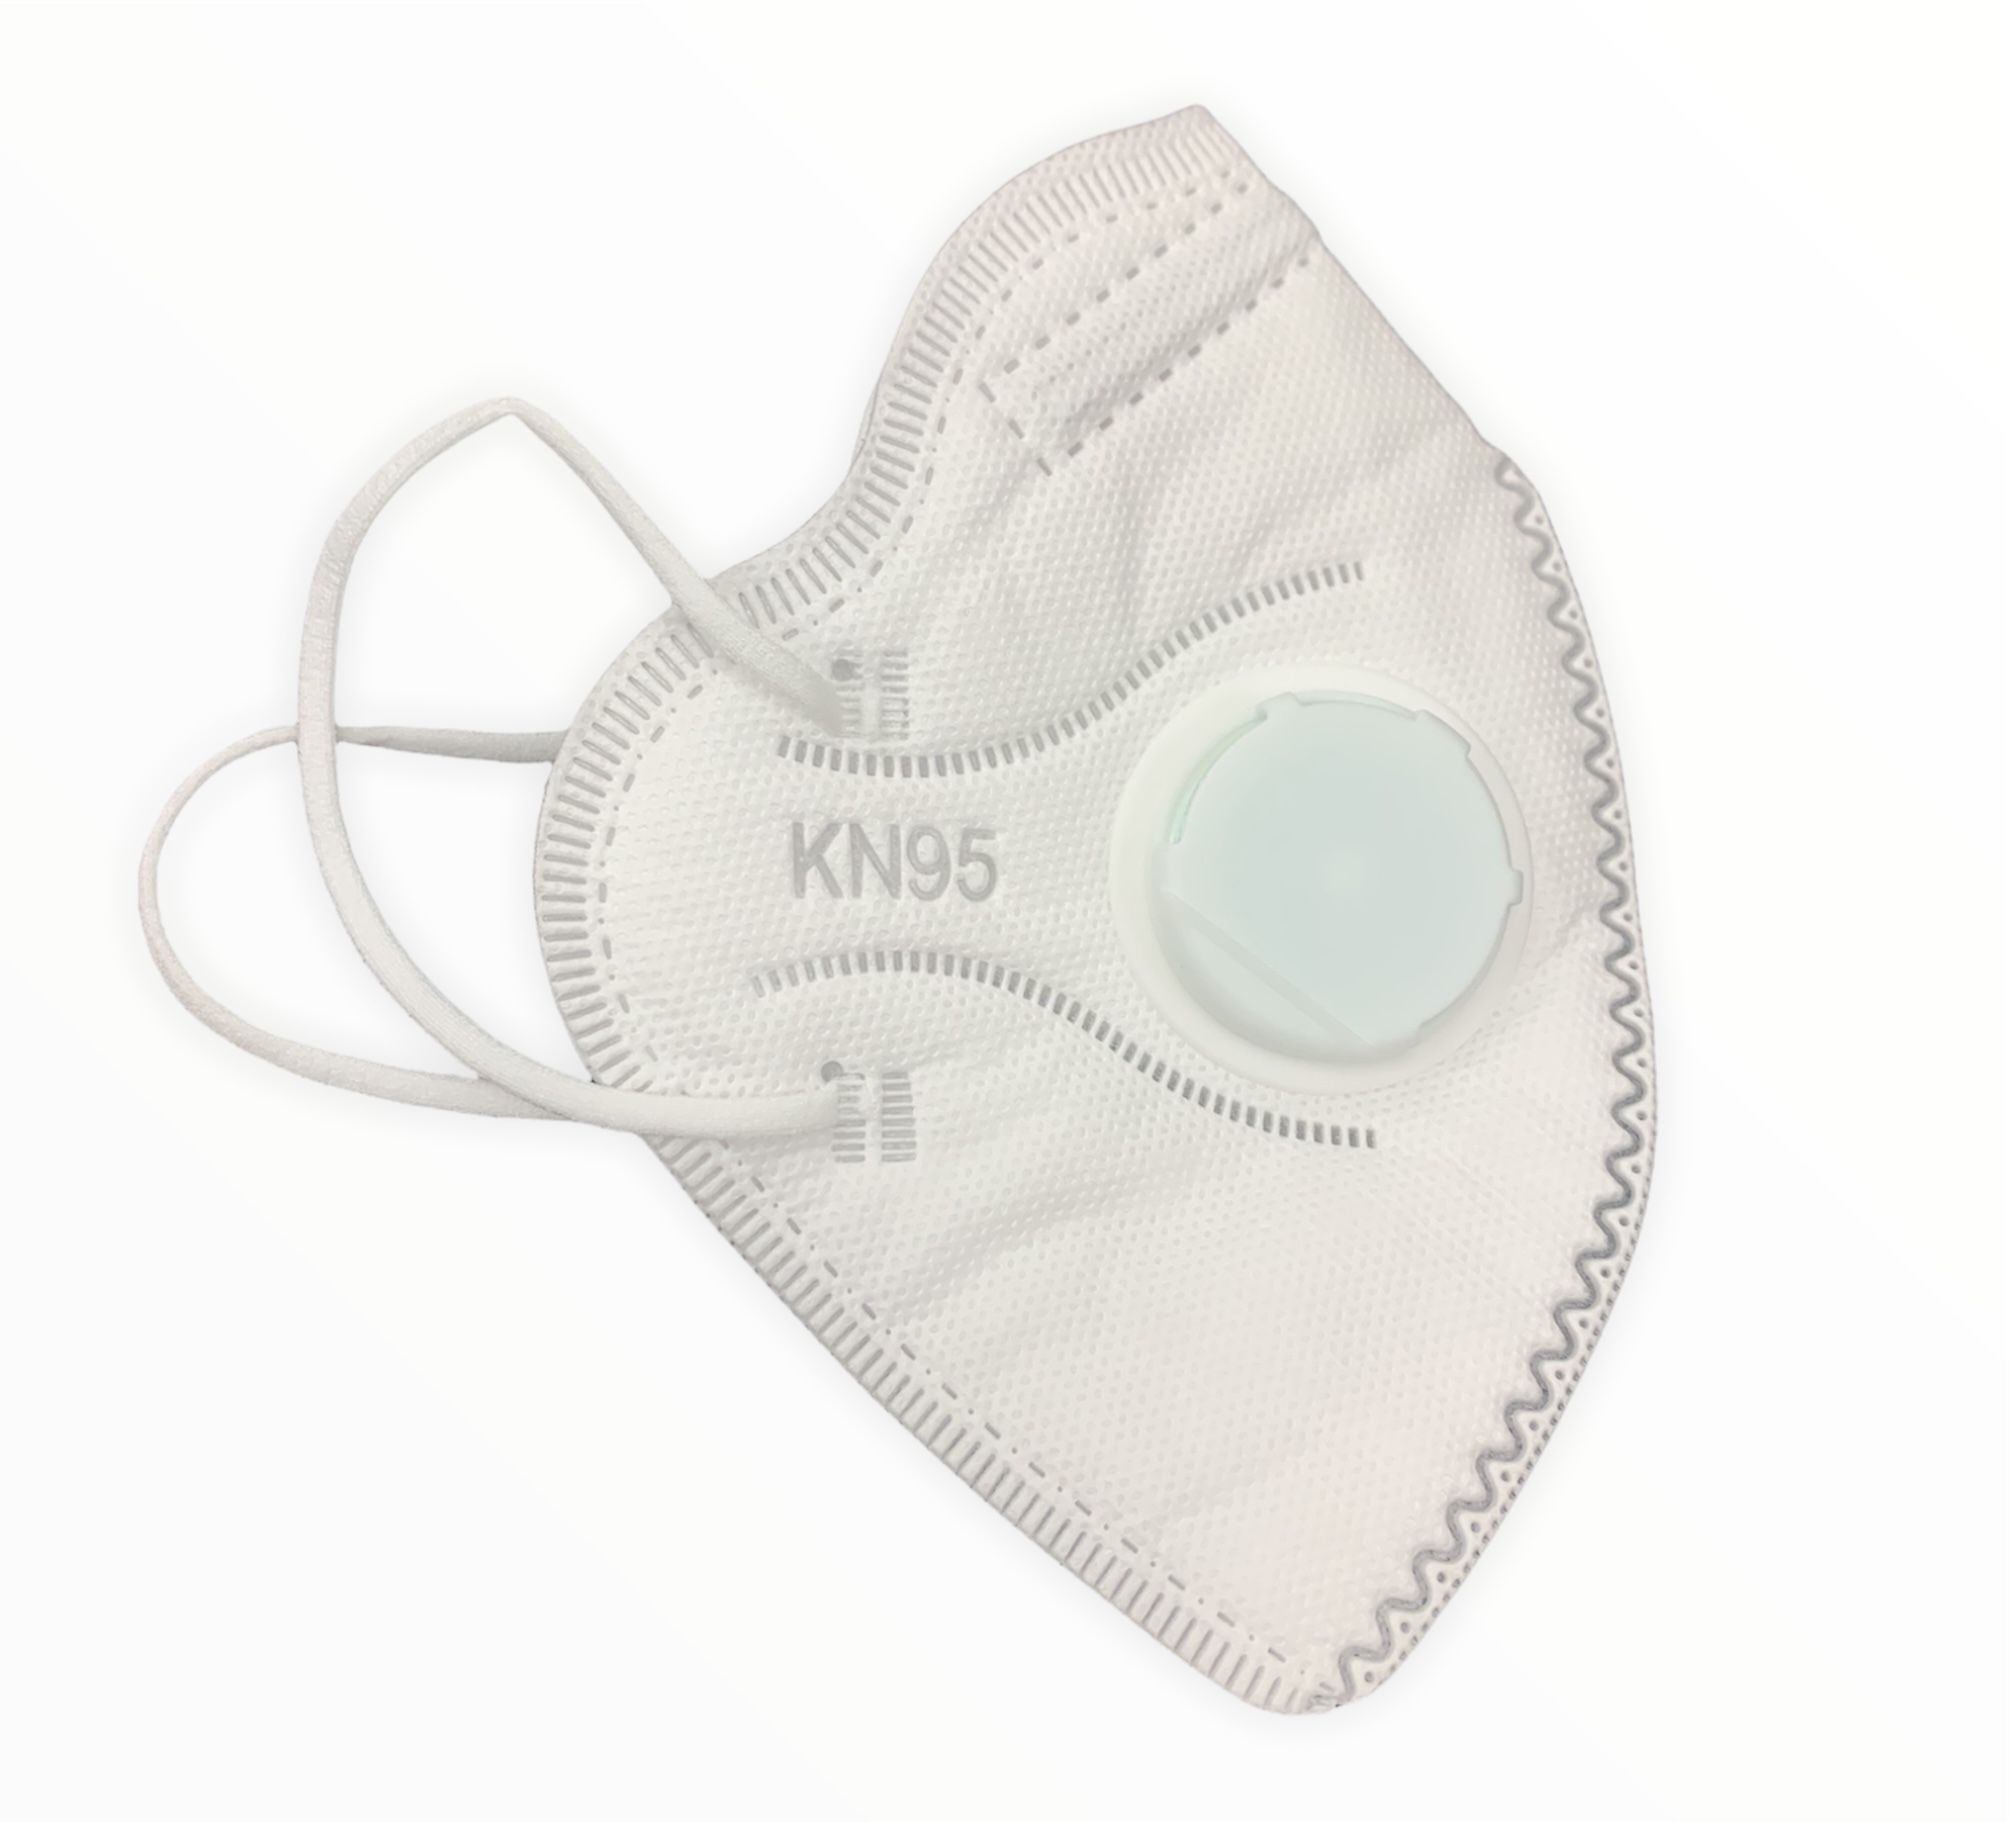 Medical Mask With Filter